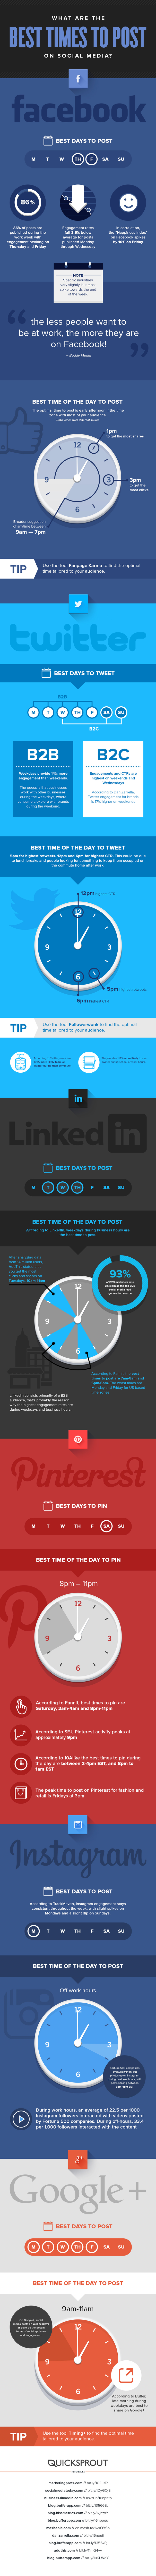 What Are The Best Times to Post on Social Media